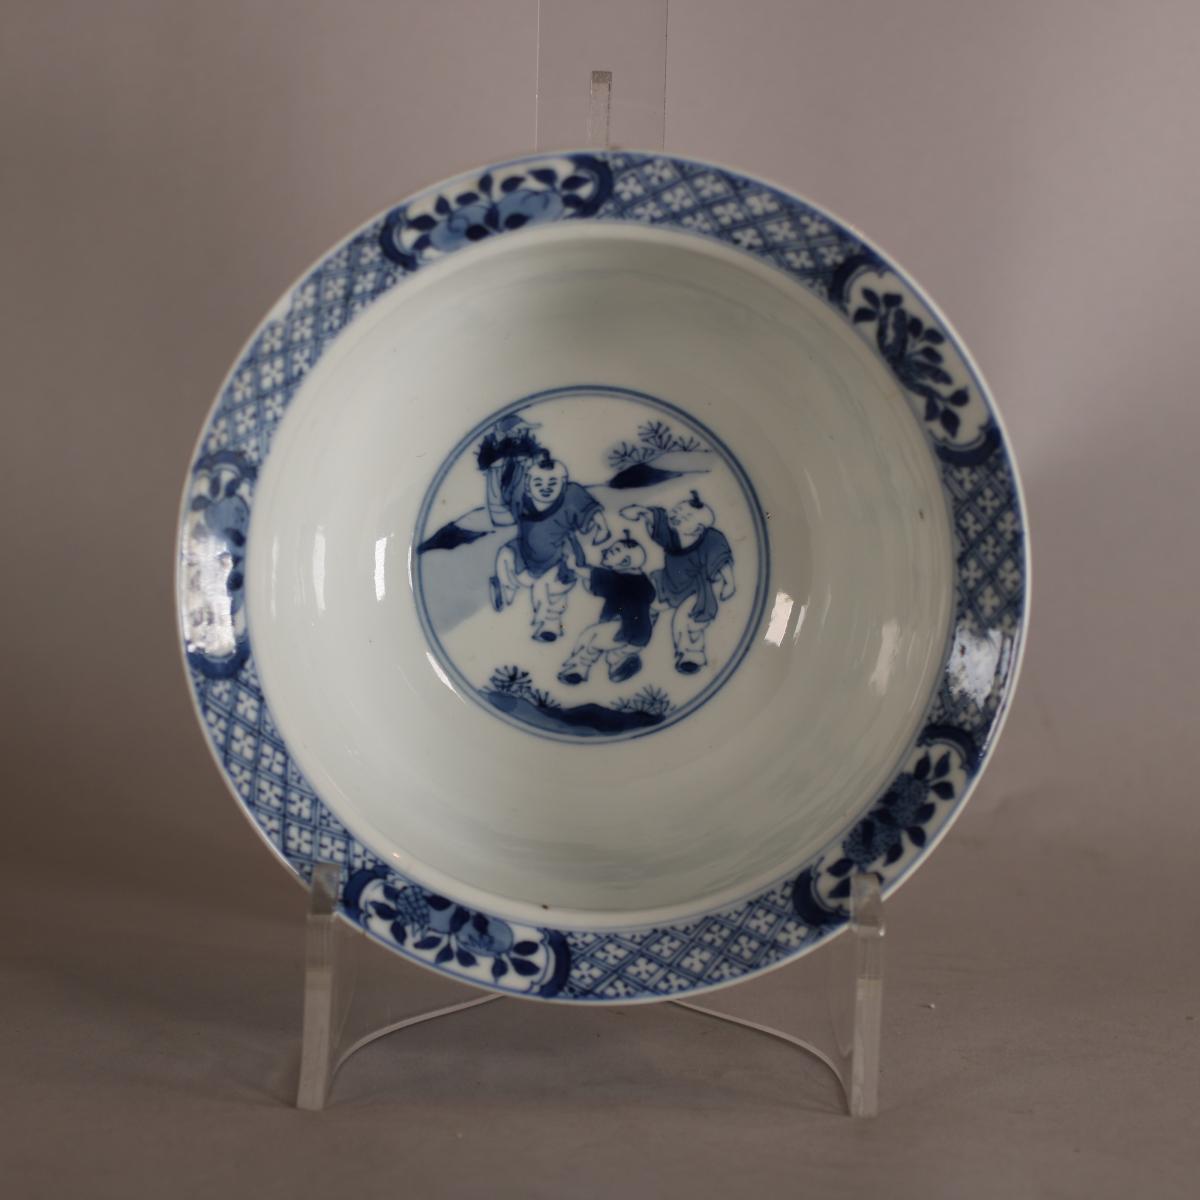 Interior of Kangxi bowl with central roundel